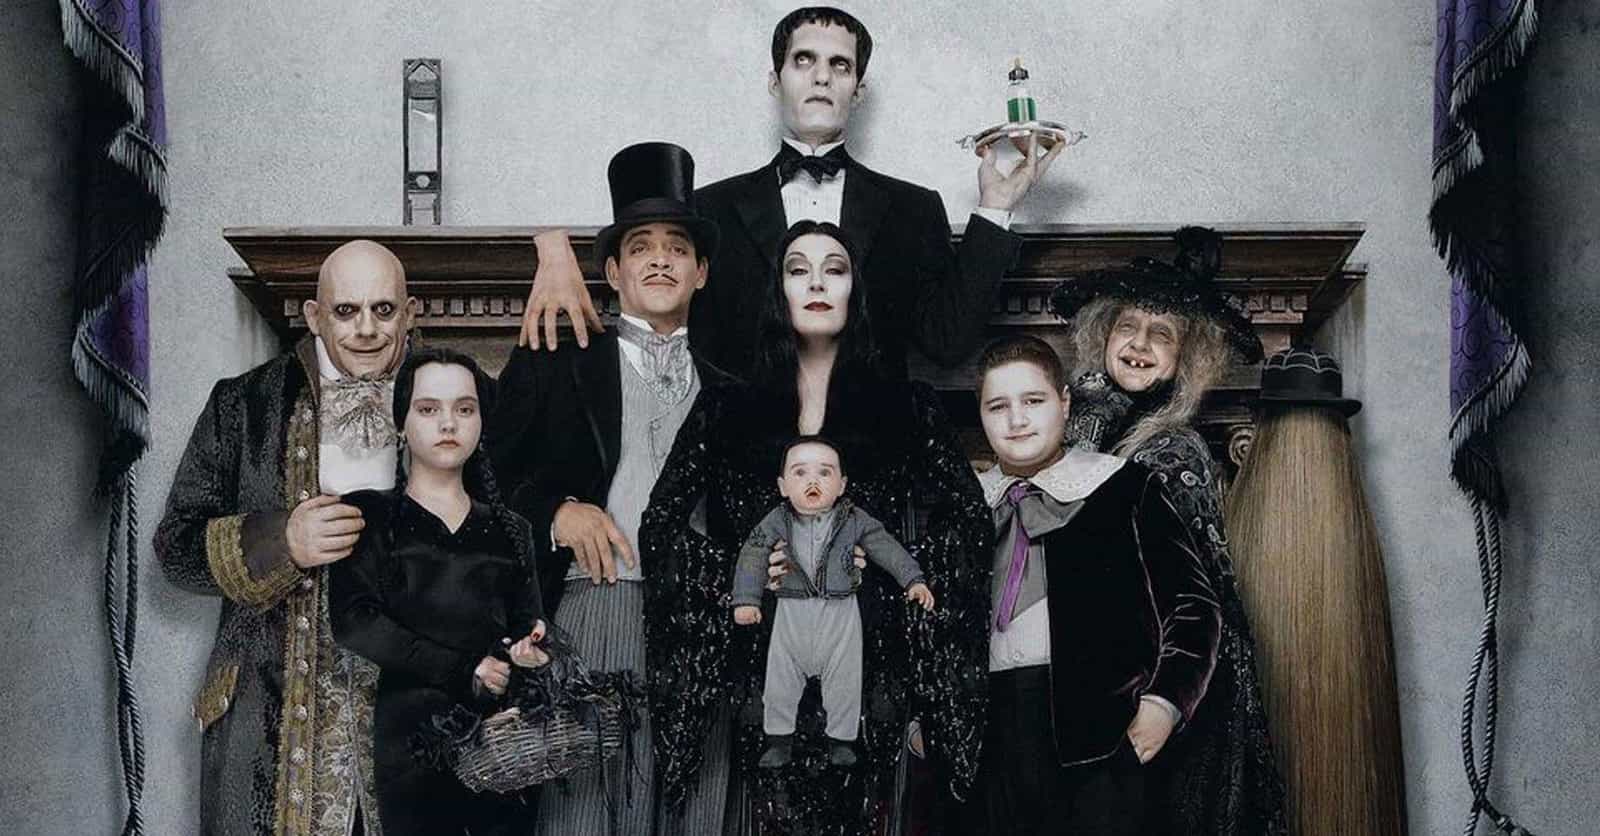 The Most Messed Up Things That Happen In 'The Addams Family' Movies